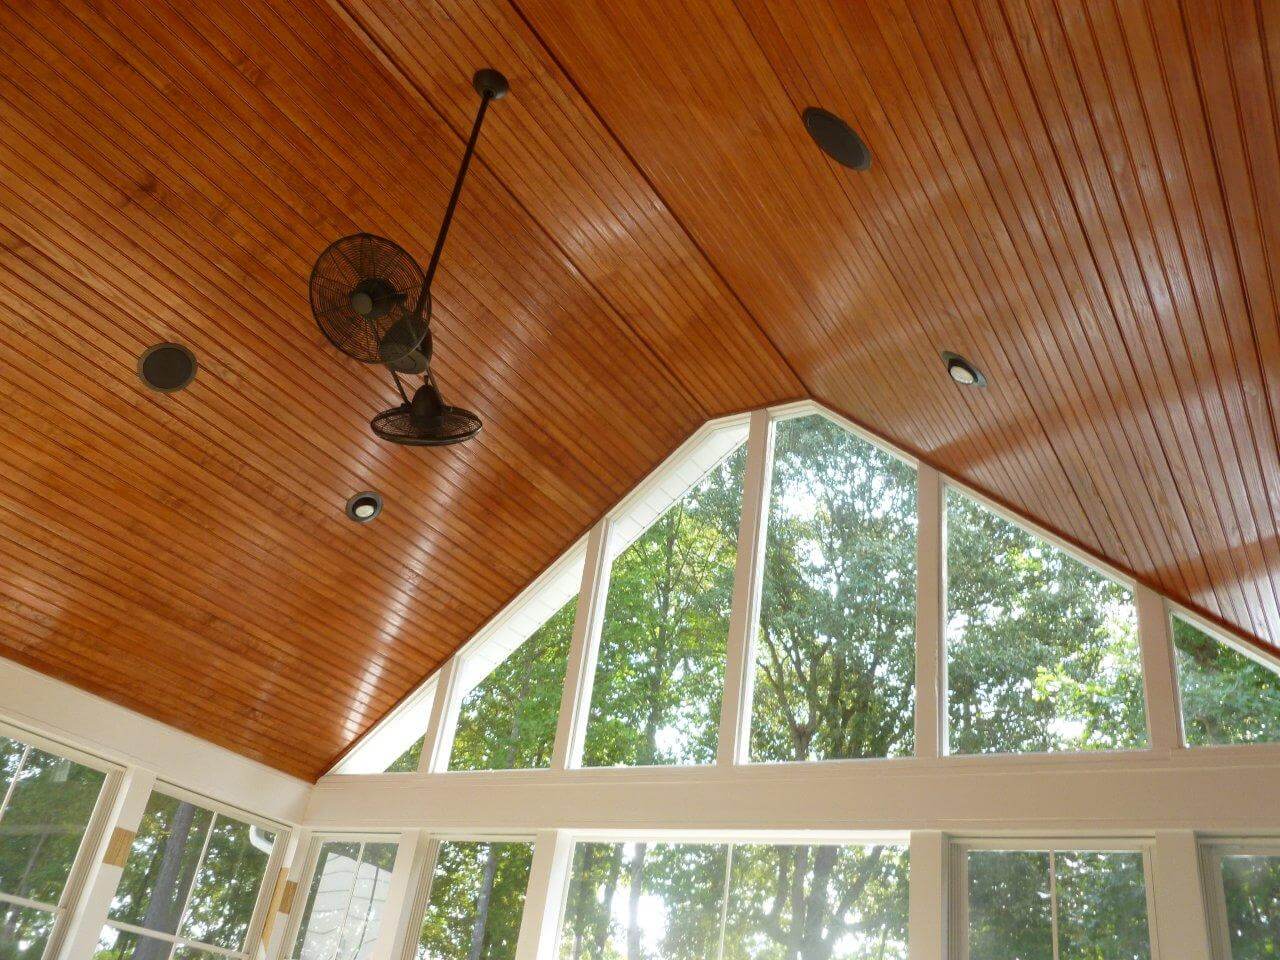 vaulted ceiling on a porch with a ceiling fan